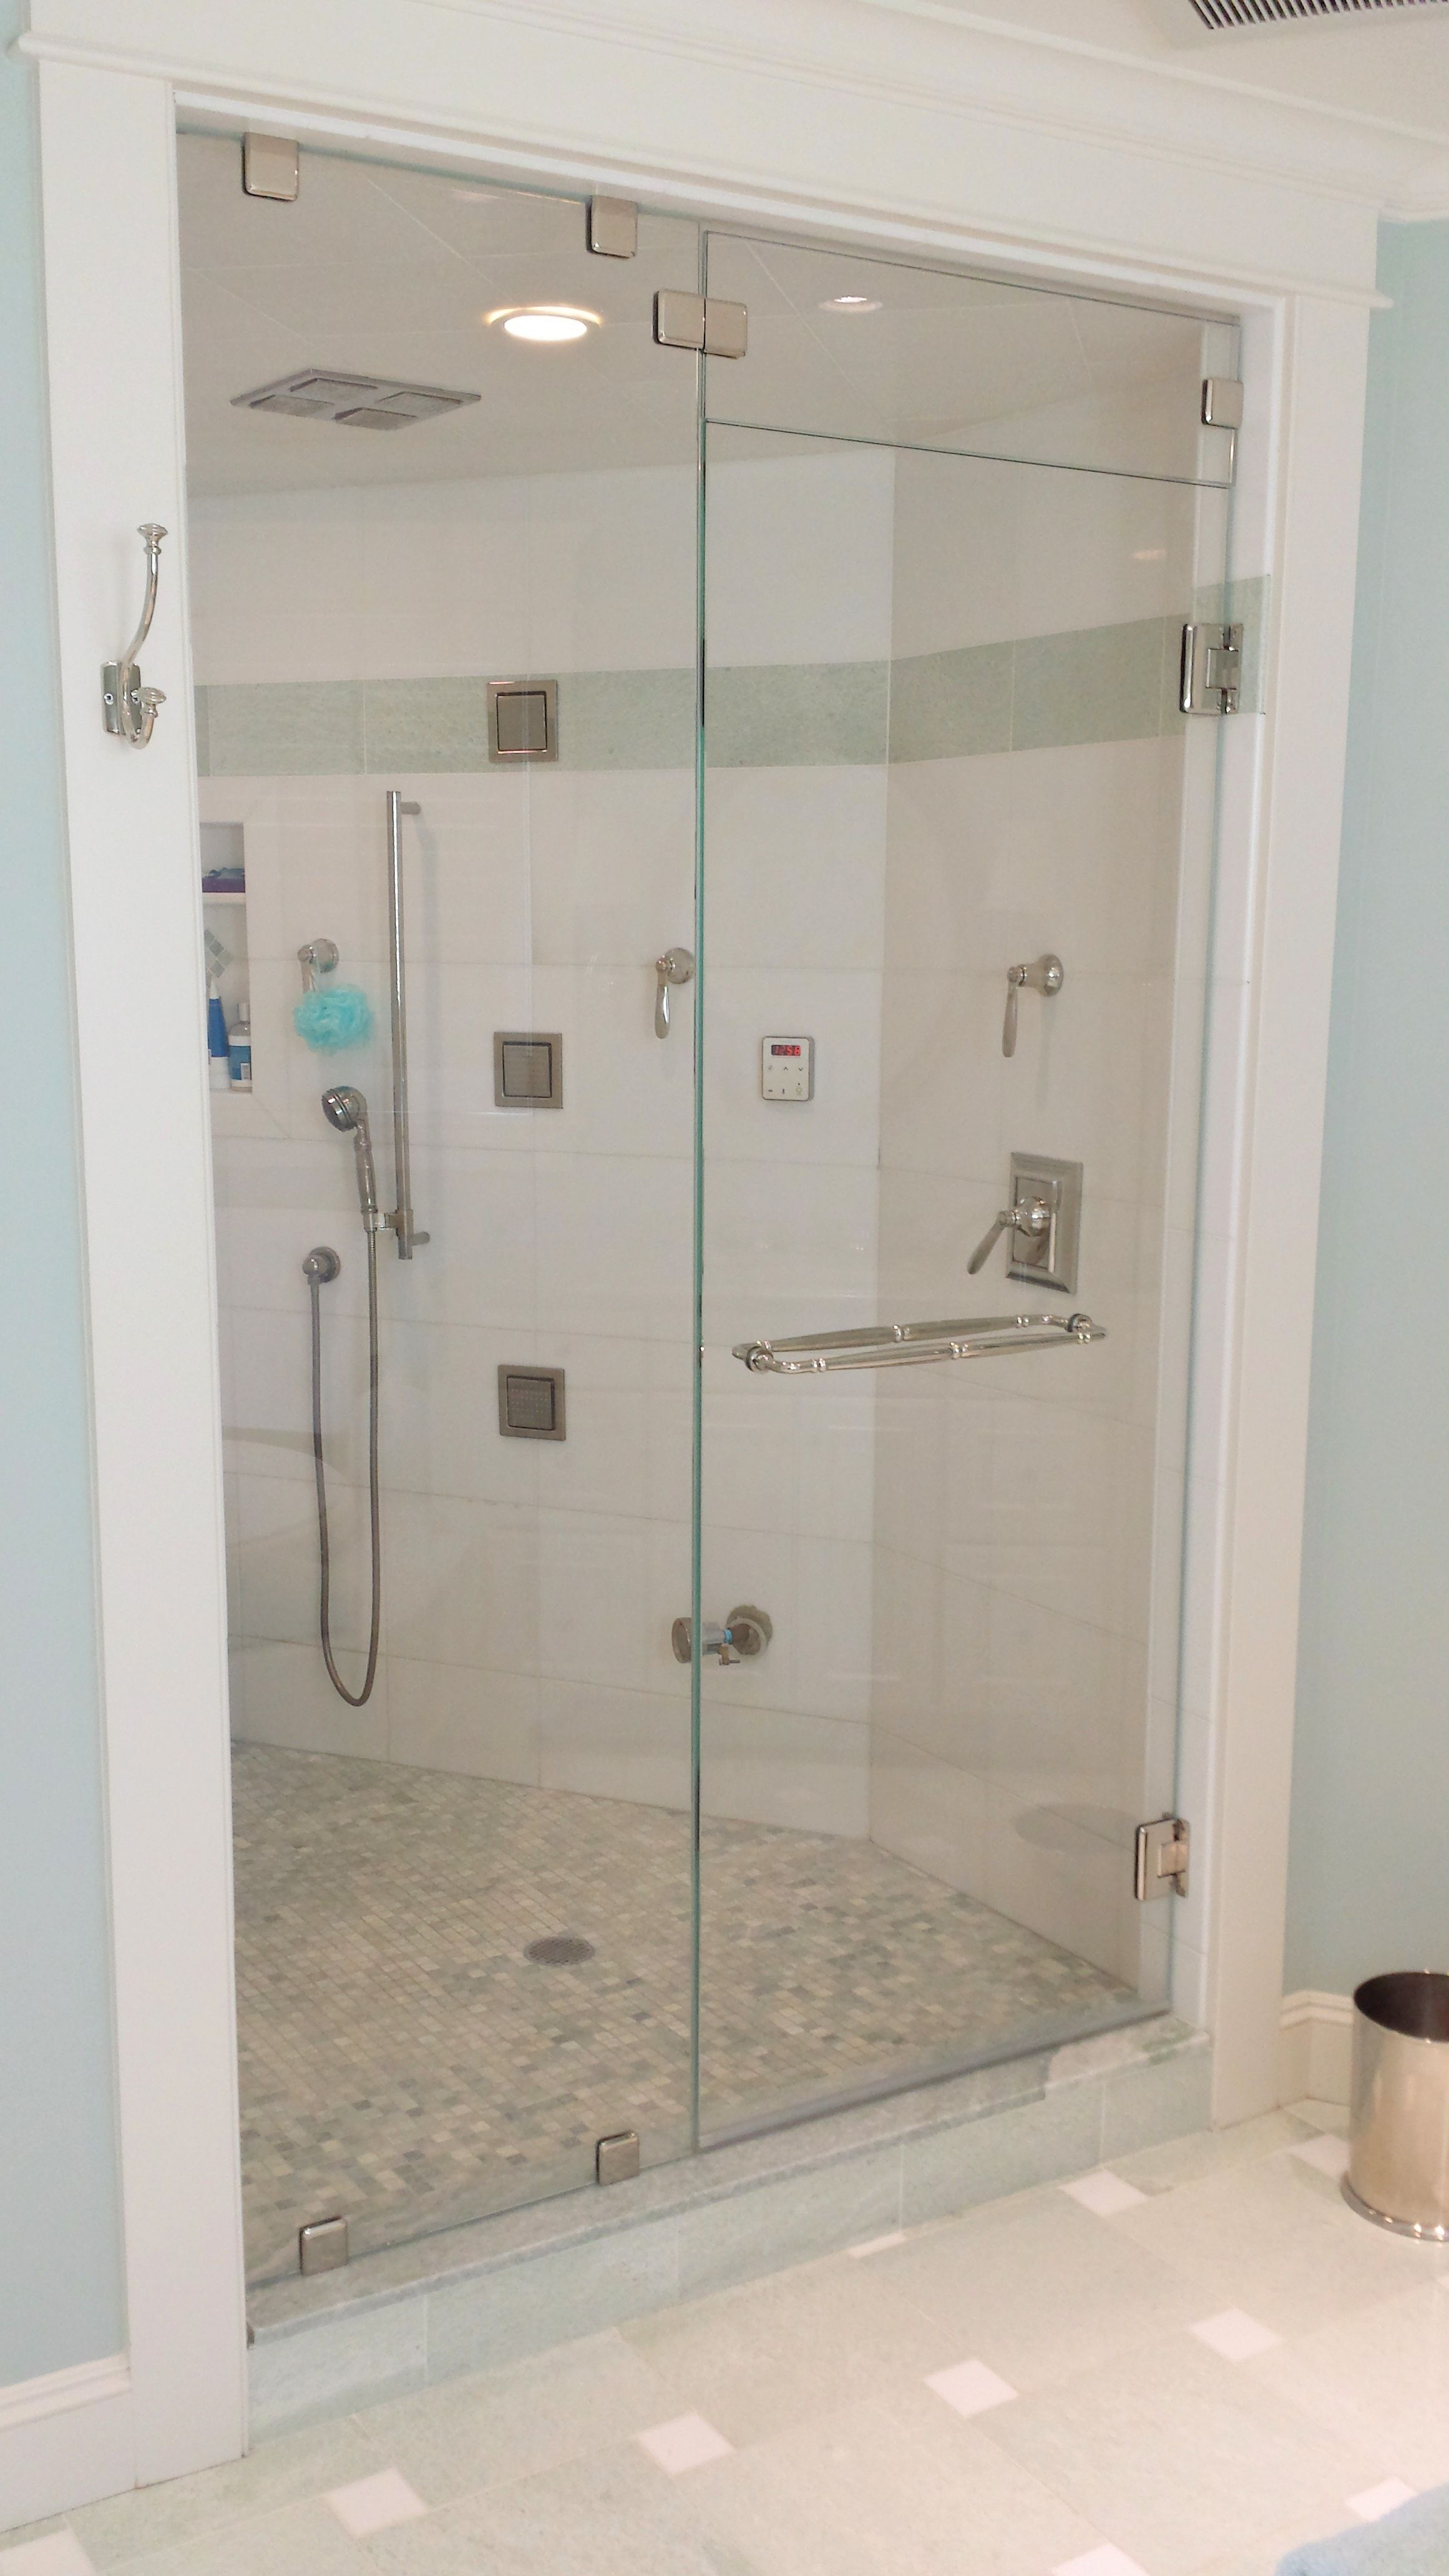 This Steam Shower Has A Flip Transom Above The Door The Panel Is with sizing 2322 X 4128